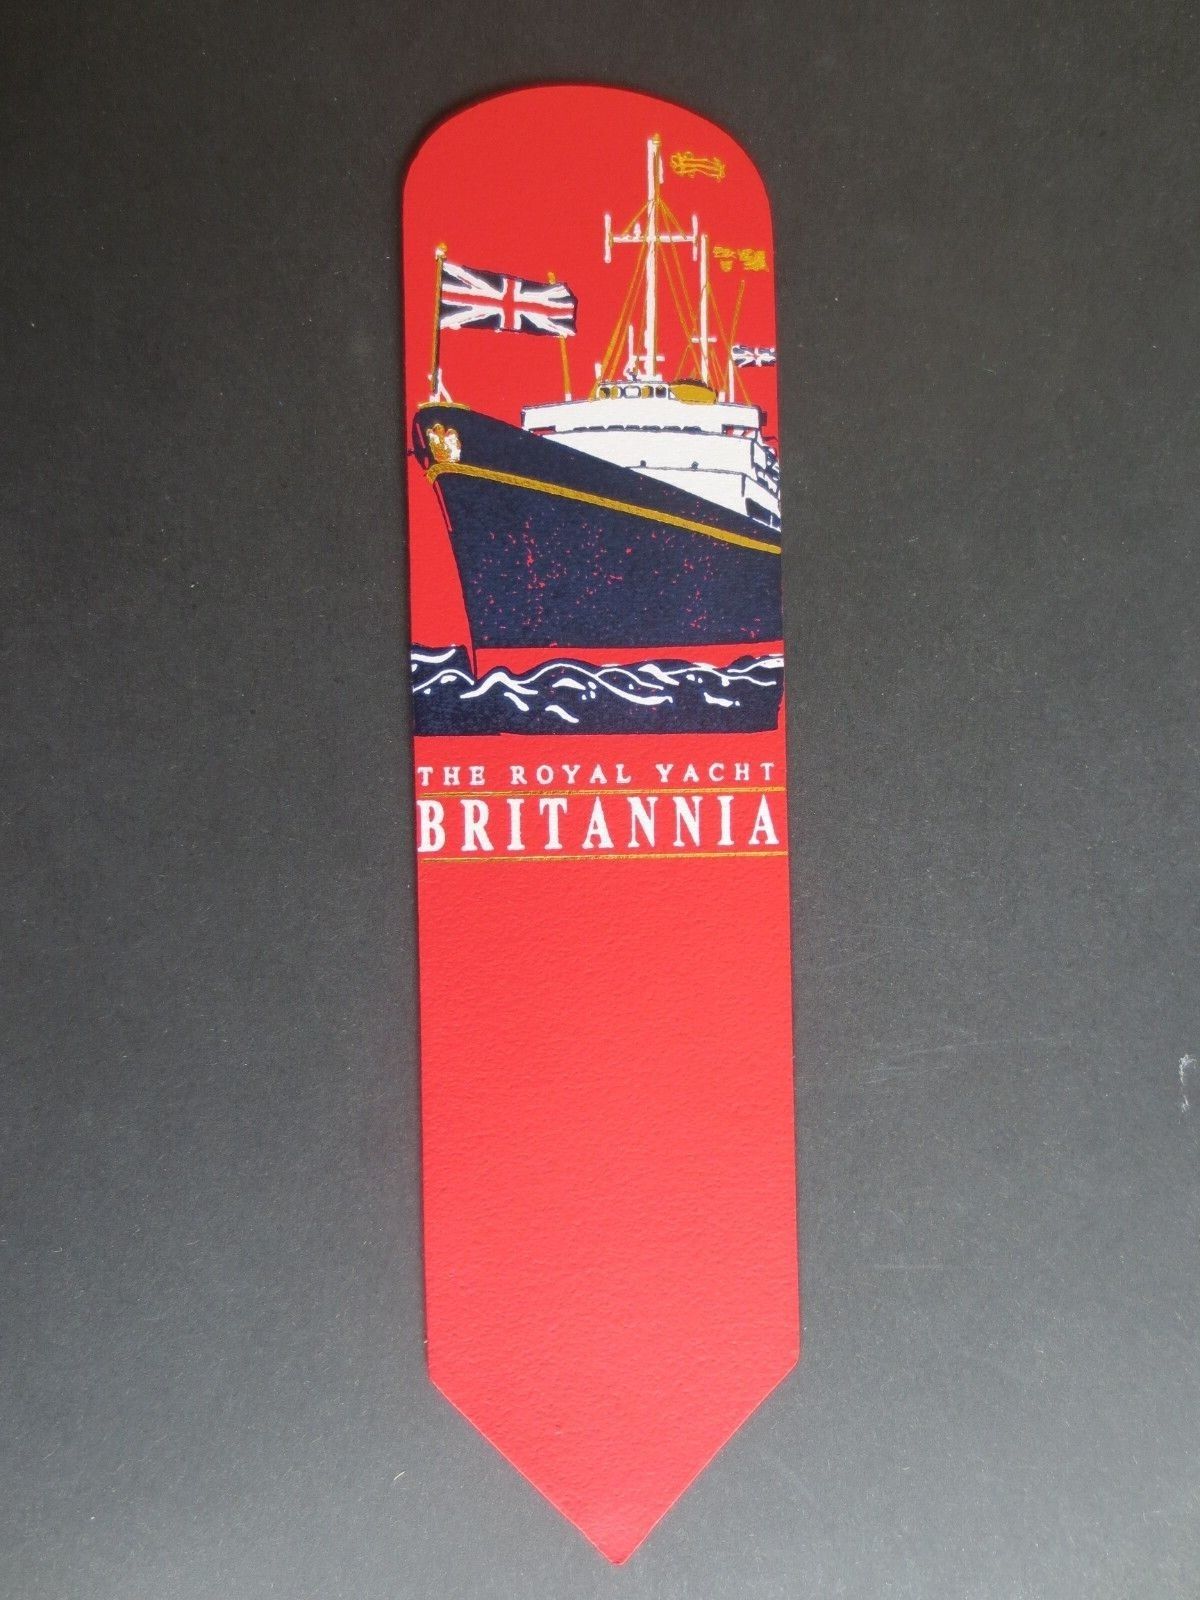   Leather BOOKMARK  ROYAL YACHT BRITANNIA Red Unused Gift